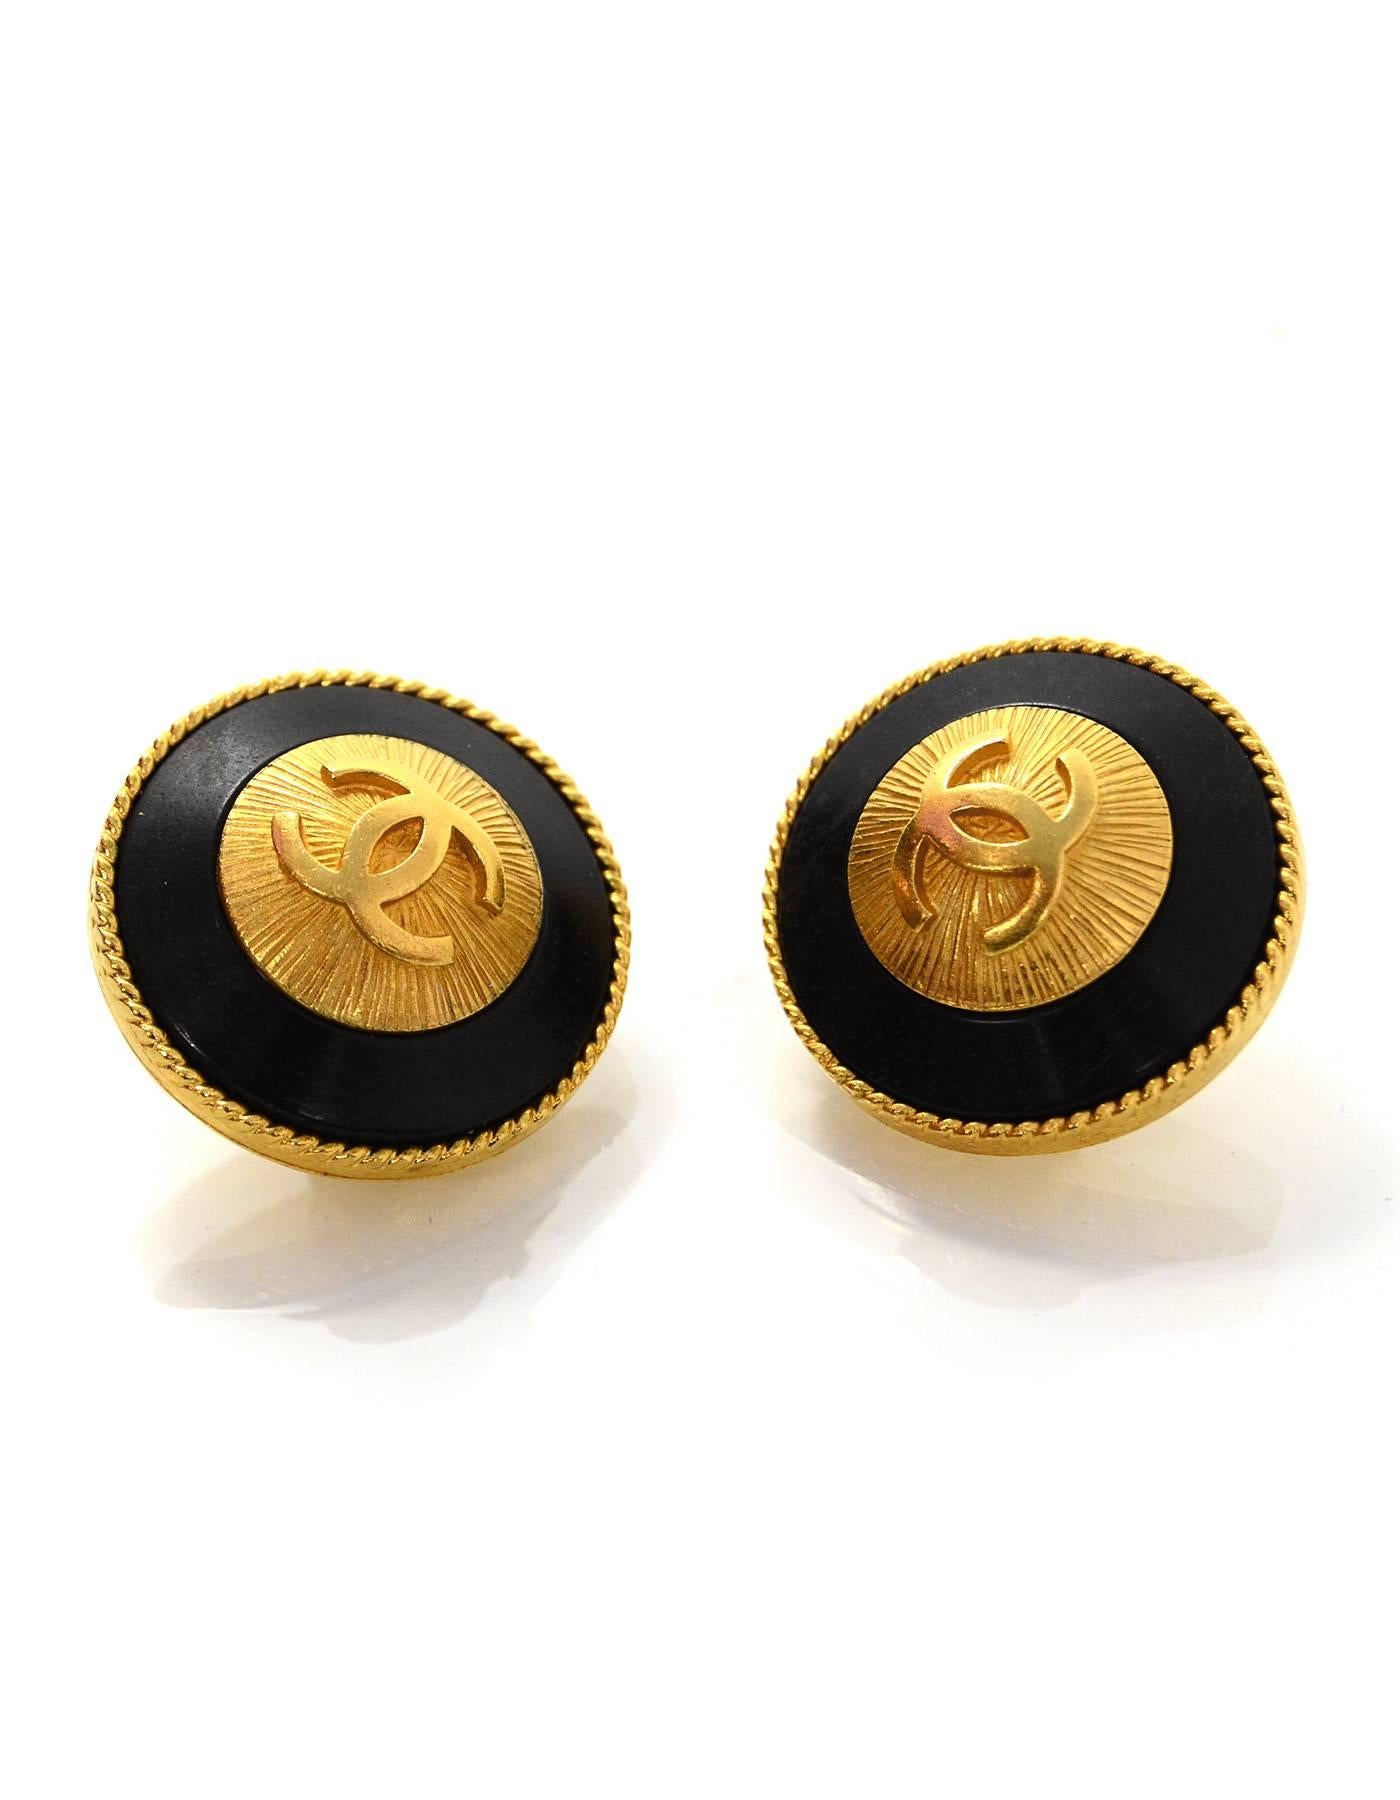 Chanel Black and Goldtone Clip-On Earrings

Made In: France
Year of Production: 1993
Color: Goldtone and black
Materials: Metal
Closure: Clip on
Stamp: Chanel 93 CC A Made in France
Overall Condition: Excellent vintage, pre-owned condition with